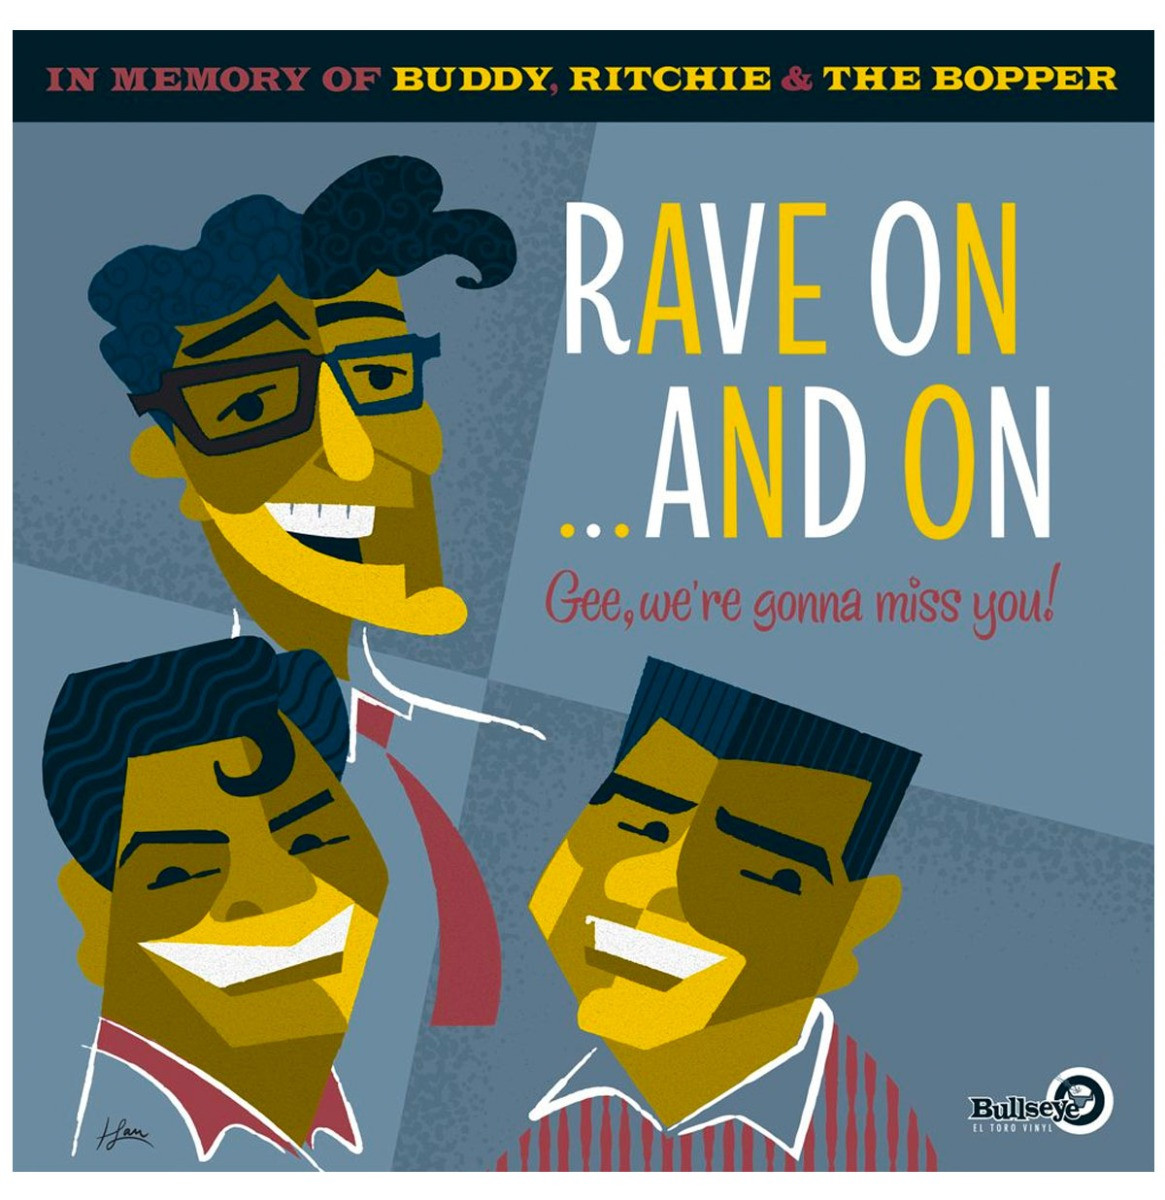 Various - Rave On...And On - In Memory of Buddy, Ritchie and The Bopper 2LP + Bonus 12"